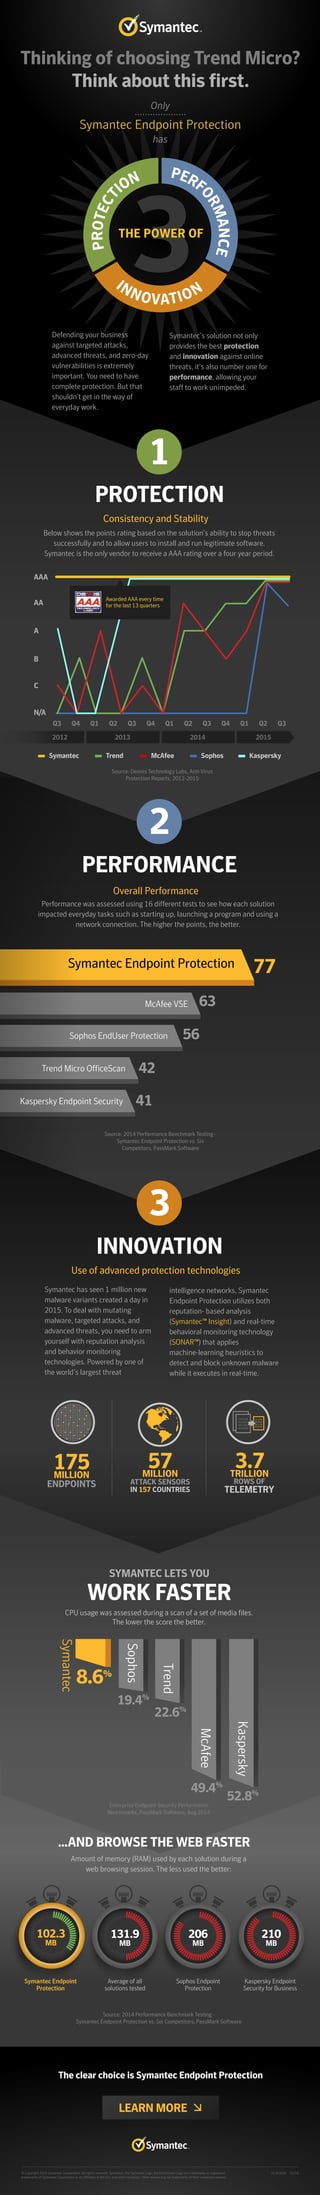 Symantec has seen 1 million new
malware variants created a day in
2015. To deal with mutating
malware, targeted attacks, and
advanced threats, you need to arm
yourself with reputation analysis
and behavior monitoring
technologies. Powered by one of
the world’s largest threat
intelligence networks, Symantec
Endpoint Protection utilizes both
reputation- based analysis
(Symantec™ Insight) and real-time
behavioral monitoring technology
(SONAR™) that applies
machine-learning heuristics to
detect and block unknown malware
while it executes in real-time.
INNOVATION
SYMANTEC LETS YOU
WORK FASTER
Use of advanced protection technologies
THE POWER OF
PROTECT
ION PERF
ORMANCE
INNOVATION
Below shows the points rating based on the solution’s ability to stop threats
successfully and to allow users to install and run legitimate software.
Symantec is the only vendor to receive a AAA rating over a four year period.
Thinking of choosing Trend Micro?
Think about this first.
Symantec Endpoint Protection
Only
has
Defending your business
against targeted attacks,
advanced threats, and zero-day
vulnerabilities is extremely
important. You need to have
complete protection. But that
shouldn’t get in the way of
everyday work.
Symantec’s solution not only
provides the best protection
and innovation against online
threats, it’s also number one for
performance, allowing your
staff to work unimpeded.
1
PROTECTION
McAfee VSE
Sophos EndUser Protection
Trend Micro OfficeScan
Kaspersky Endpoint Security
Symantec Endpoint Protection
Source: Dennis Technology Labs, Anti-Virus
Protection Reports, 2012-2015
2
PERFORMANCE
AAA
AA
B
C
A
N/A
Q3 Q4 Q1 Q2 Q3 Q4 Q1 Q2 Q3 Q4 Q1 Q2 Q3
2012 2013 2014 2015
Symantec Trend McAfee Sophos Kaspersky
Overall Performance
Consistency and Stability
3
Source: 2014 Performance Benchmark Testing -
Symantec Endpoint Protection vs. Six
Competitors, PassMark Software
77
63
56
42
41
Performance was assessed using 16 different tests to see how each solution
impacted everyday tasks such as starting up, launching a program and using a
network connection. The higher the points, the better.
Source: 2014 Performance Benchmark Testing -
Symantec Endpoint Protection vs. Six Competitors, PassMark Software
The clear choice is Symantec Endpoint Protection
Average of all
solutions tested
Sophos Endpoint
Protection
206
MB
Kaspersky Endpoint
Security for Business
210
MB
131.9
MB
LEARN MORE
102.3
MB
CPU usage was assessed during a scan of a set of media files.
The lower the score the better.
175MILLION MILLION TRILLION
ENDPOINTS
3.7
ROWS OF
TELEMETRY
57
ATTACK SENSORS
IN 157 COUNTRIES
Awarded AAA every time
for the last 13 quarters
1010100
0010001
0011001
0010000
1010100
0010001
0011001
0010000
Symantec
8.6%
19.4%
22.6%
52.8%
Kaspersky
49.4%
McAfee
Sophos
Trend
Enterprise Endpoint Security Performance
Benchmarks, PassMark Software, Aug 2014
© Copyright 2016 Symantec Corporation. All rights reserved. Symantec, the Symantec Logo, the Checkmark Logo are trademarks or registered
trademarks of Symantec Corporation or its affiliates in the U.S. and other countries. Other names may be trademarks of their respective owners.
21363026 01/16
...AND BROWSE THE WEB FASTER
Amount of memory (RAM) used by each solution during a
web browsing session. The less used the better:
Symantec Endpoint
Protection
 